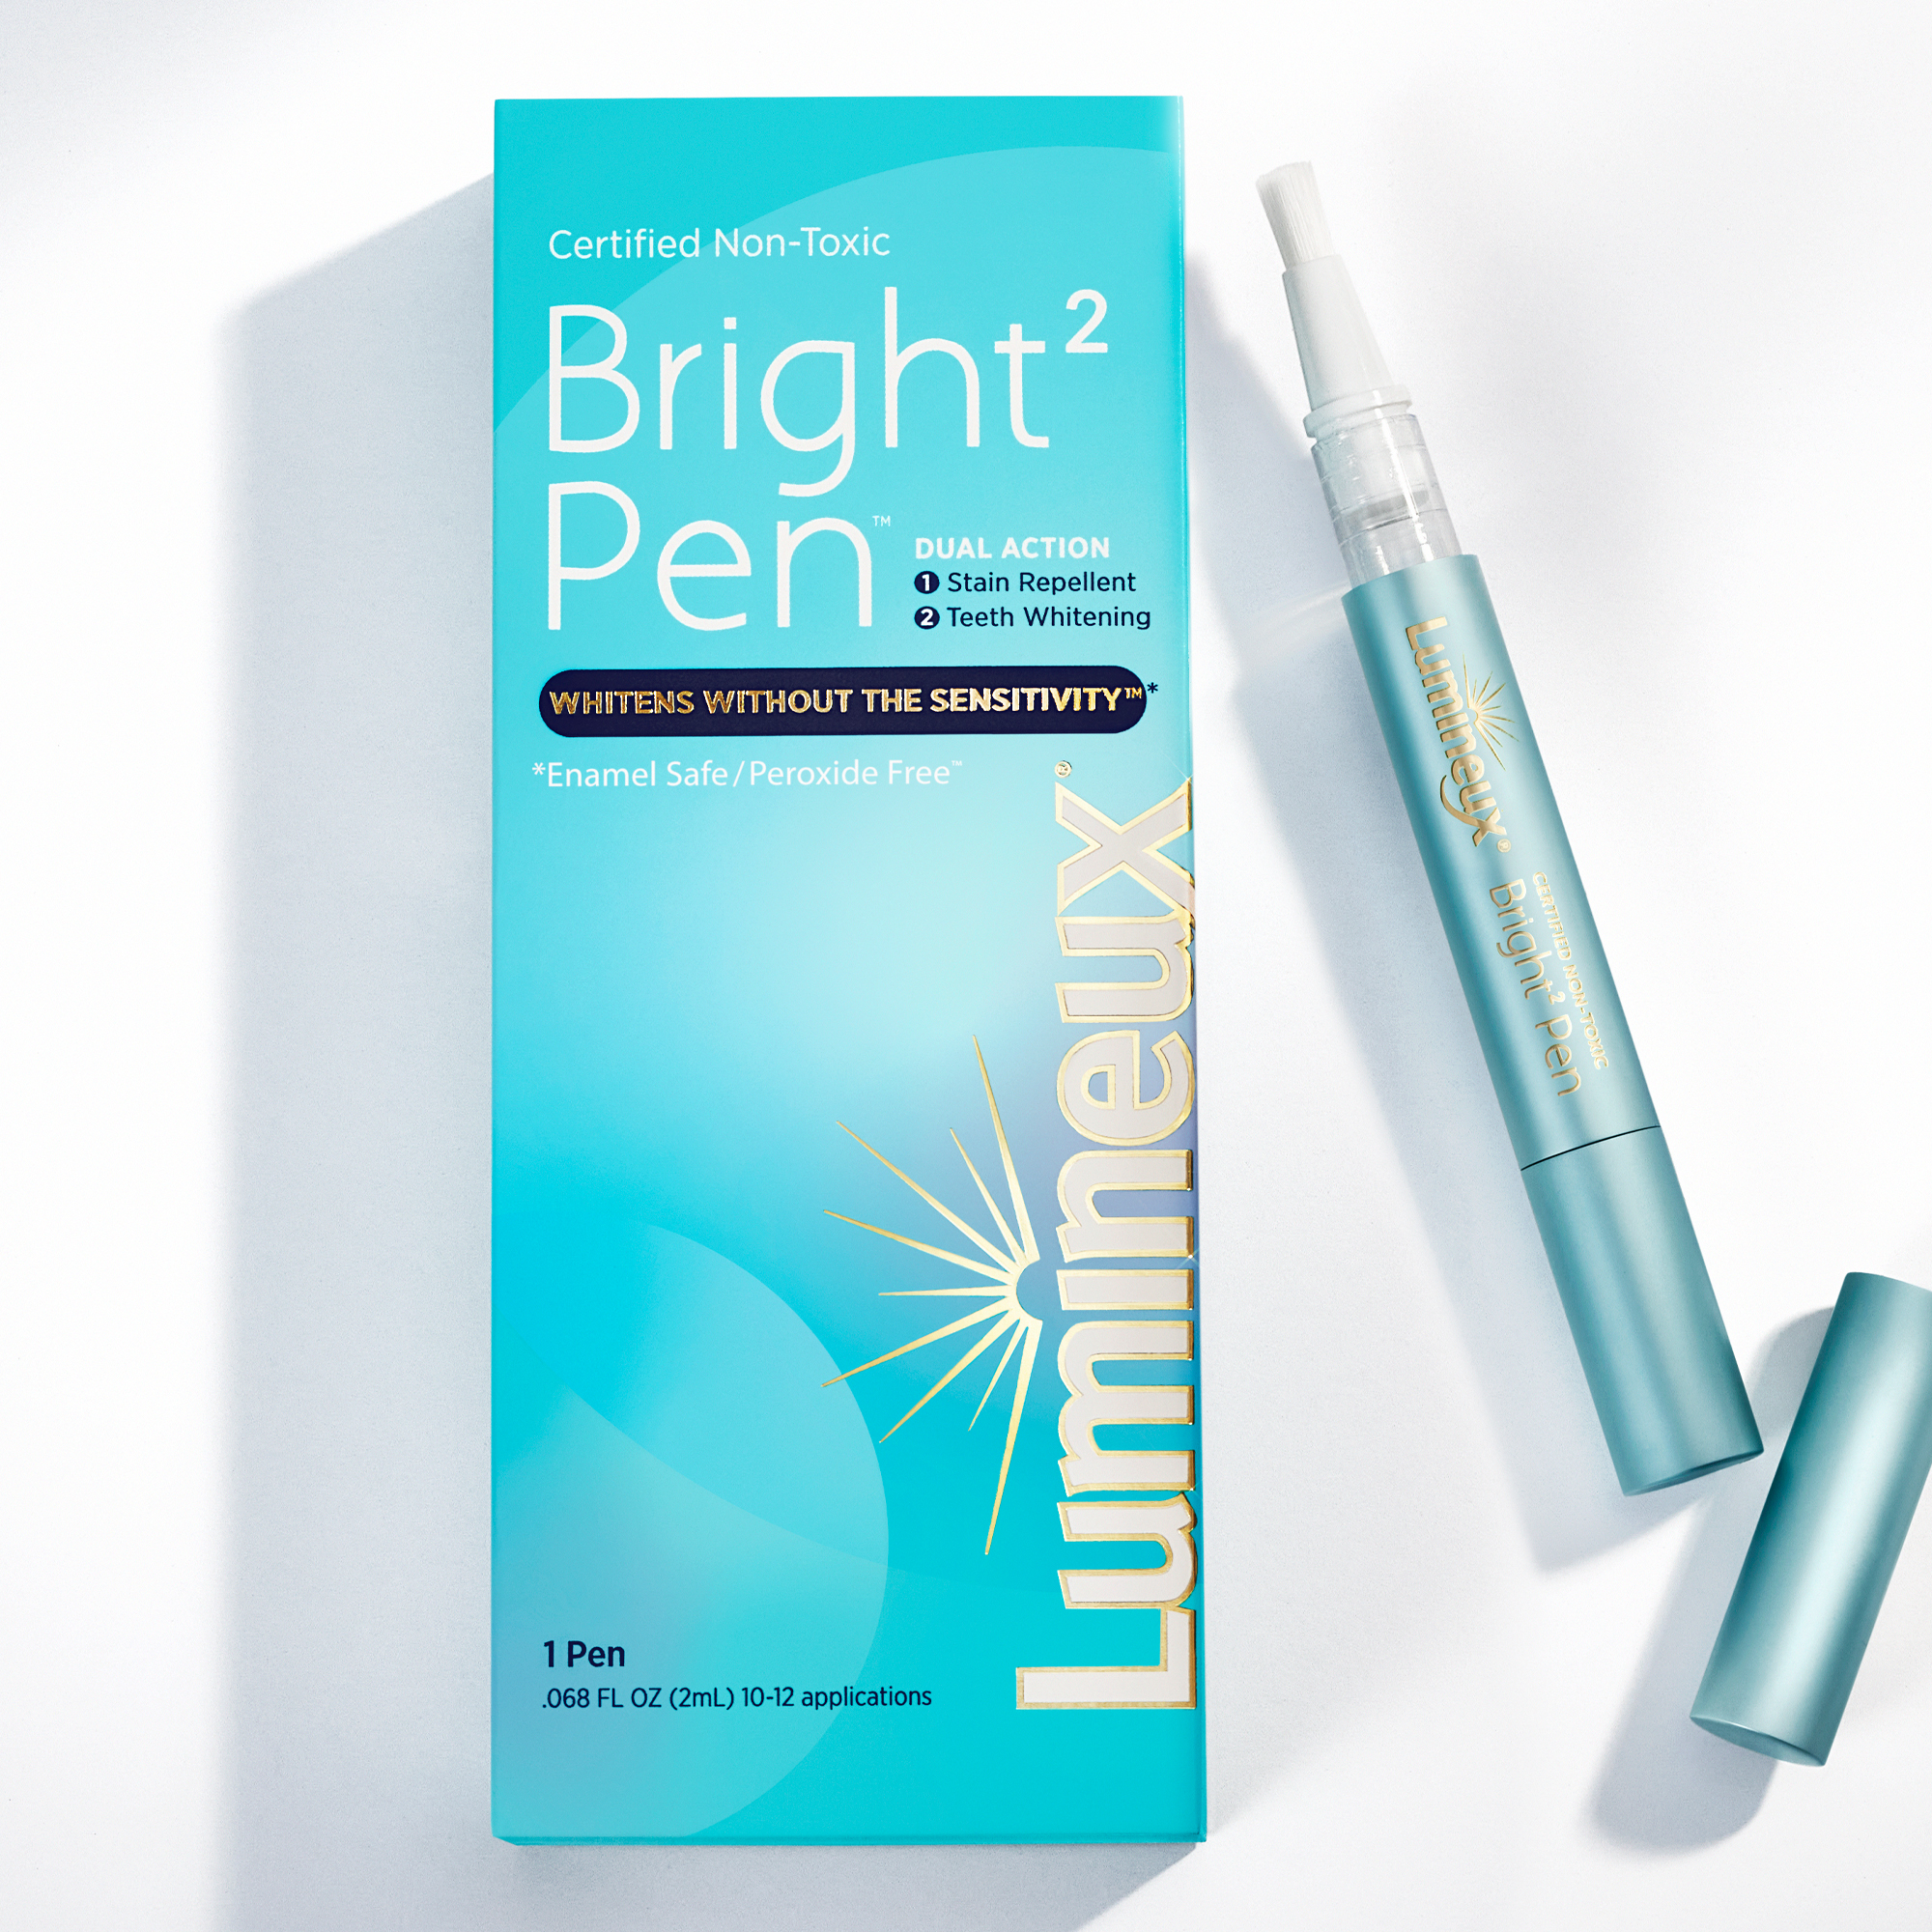 Lumineux Teeth Whitening & Dual Action Stain Repellant Bright, 2 Pens - image 2 of 15